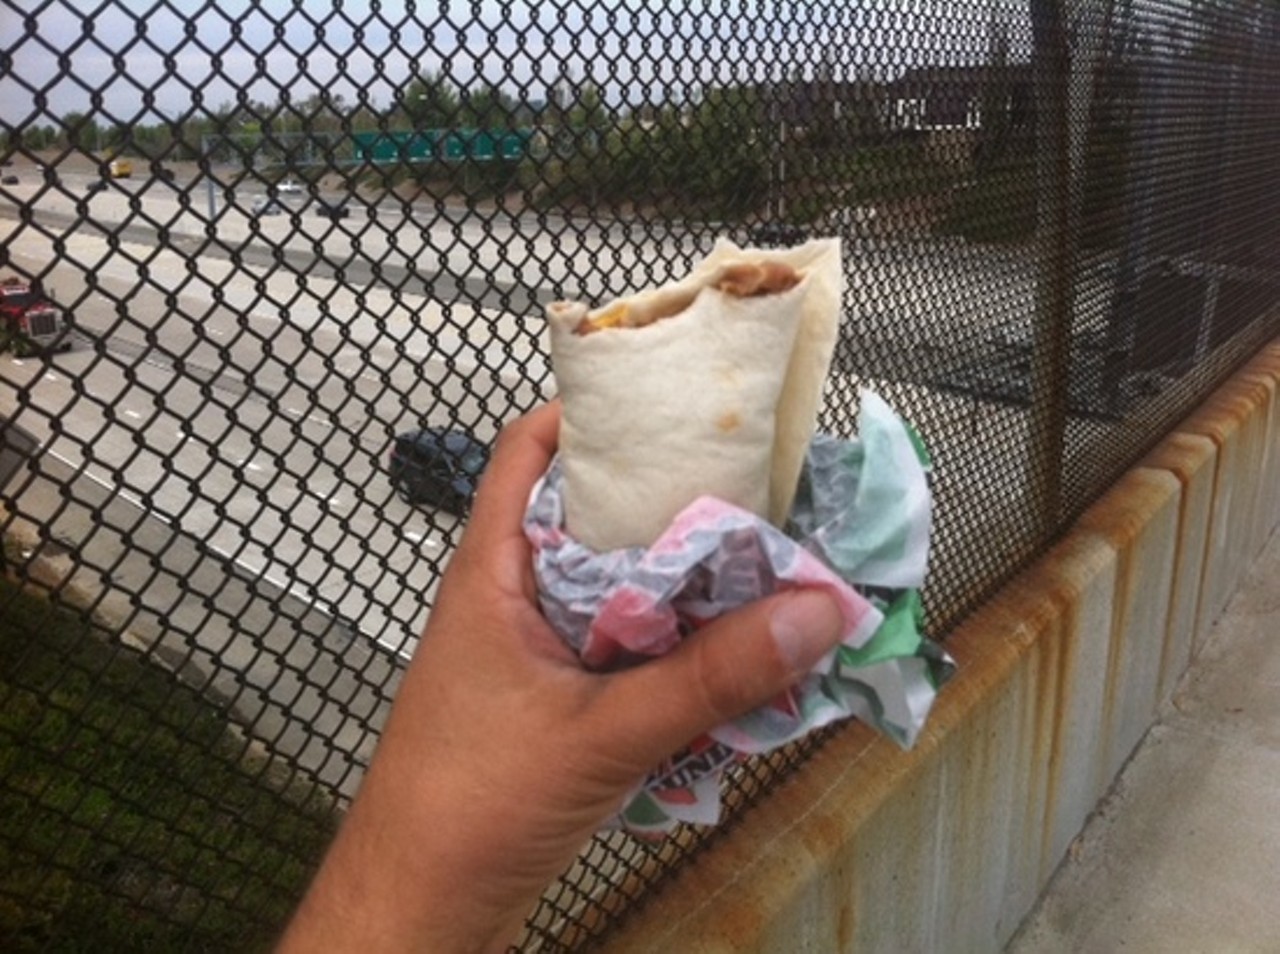 2. The Del Taco Bean-and-Cheese Burrito: I've gone on record multiple times proclaiming my love for the Del Taco half-pound bean-and-cheese burrito that costs $1.08 with taxes, and not just because it's so delicious. Eating this burrito is consuming living, breathing history, because the first burritos to capture the fancy of Southern California (the burrito capital of America) were these. Del Taco has not fundamentally changed its recipe in its 50+ years, because why bother with perfection?
And speaking of perfection: The most important burrito in burrito history is no contest...